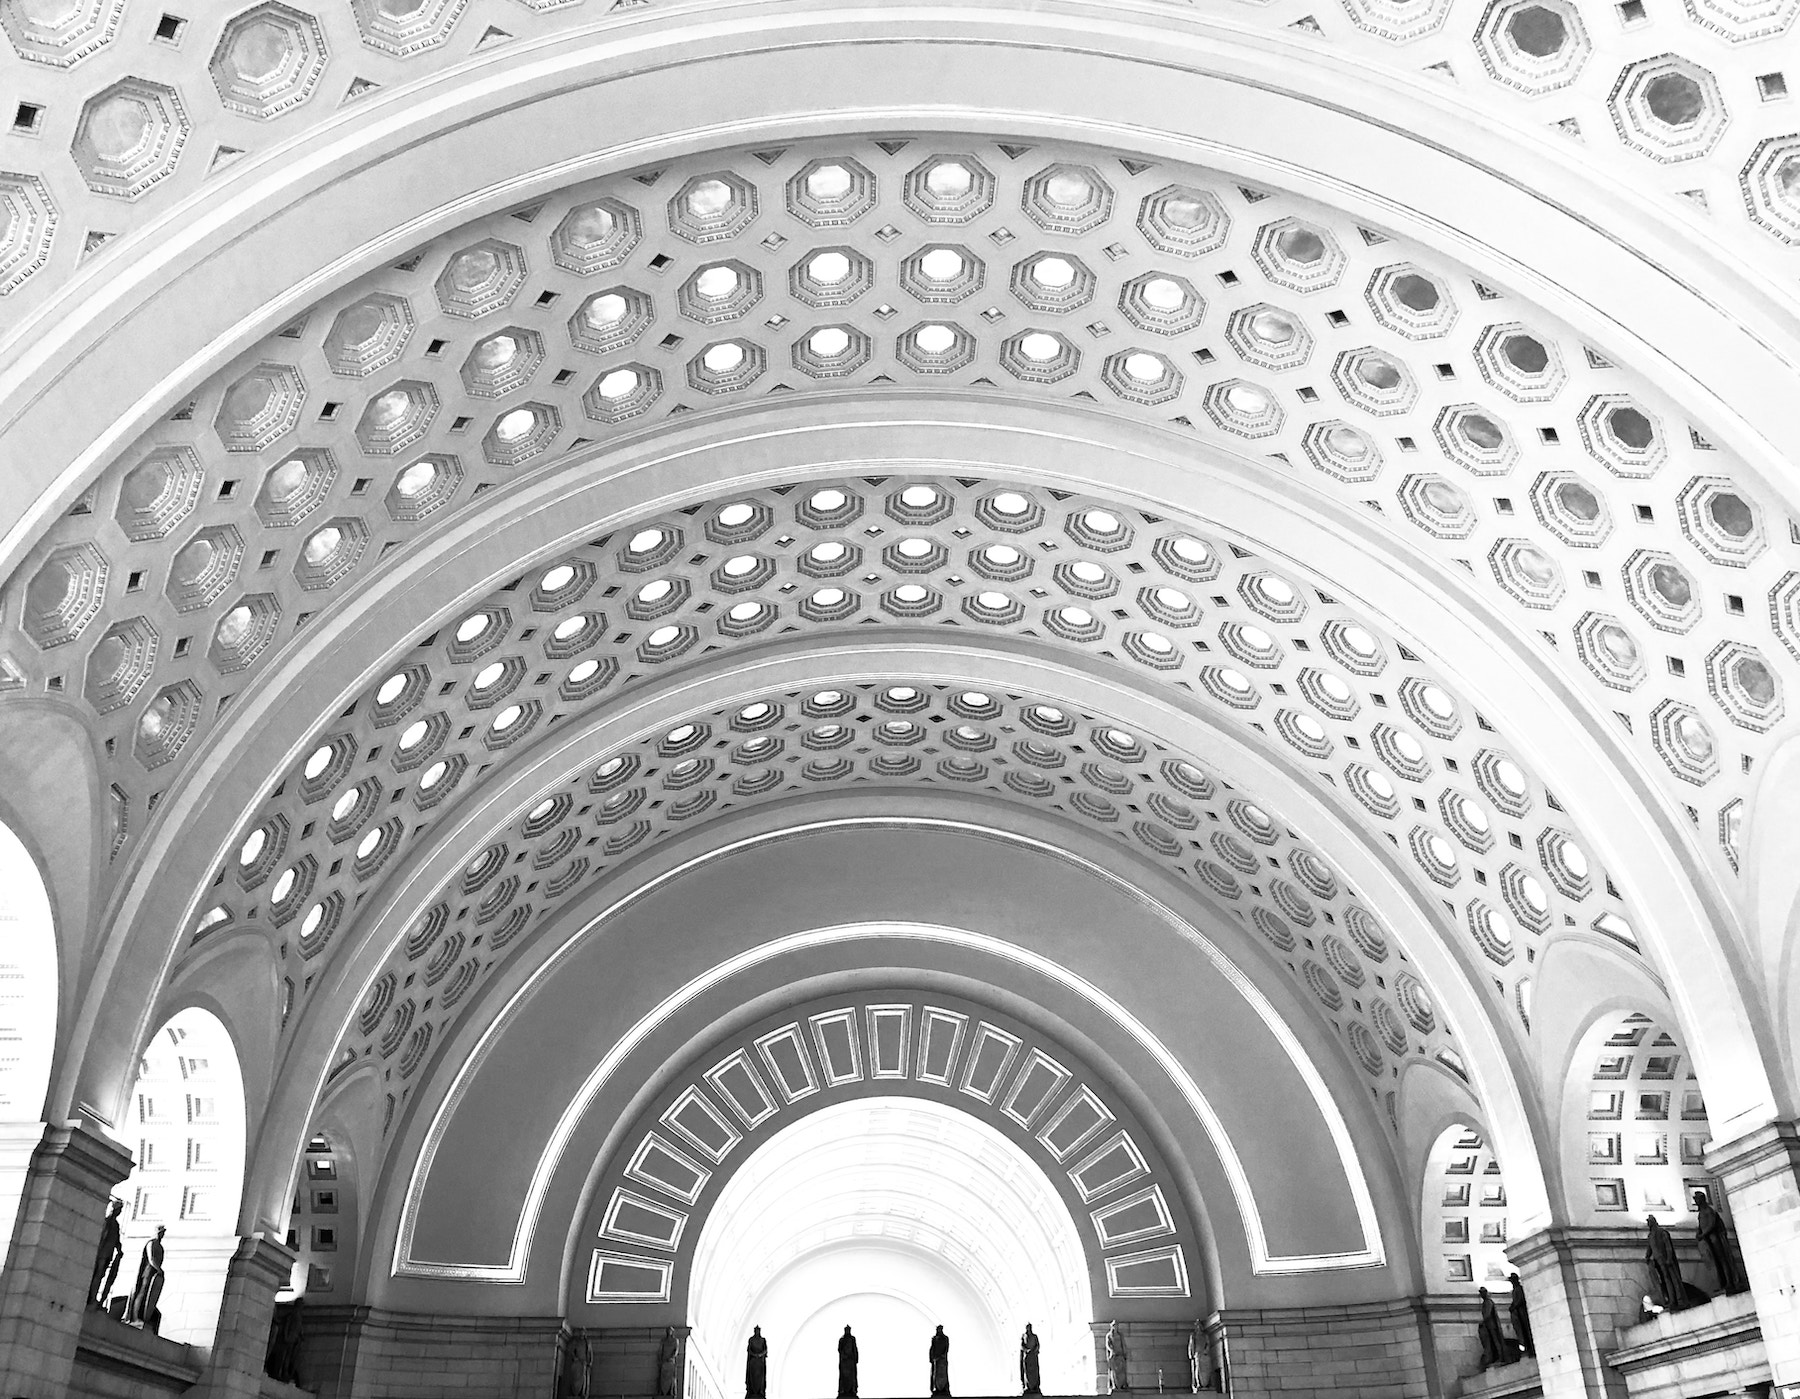 Black and white interior of Union Station in Washington, DC. The ceiling is vast, arching and ornate. Statues stand tall below an arch way.